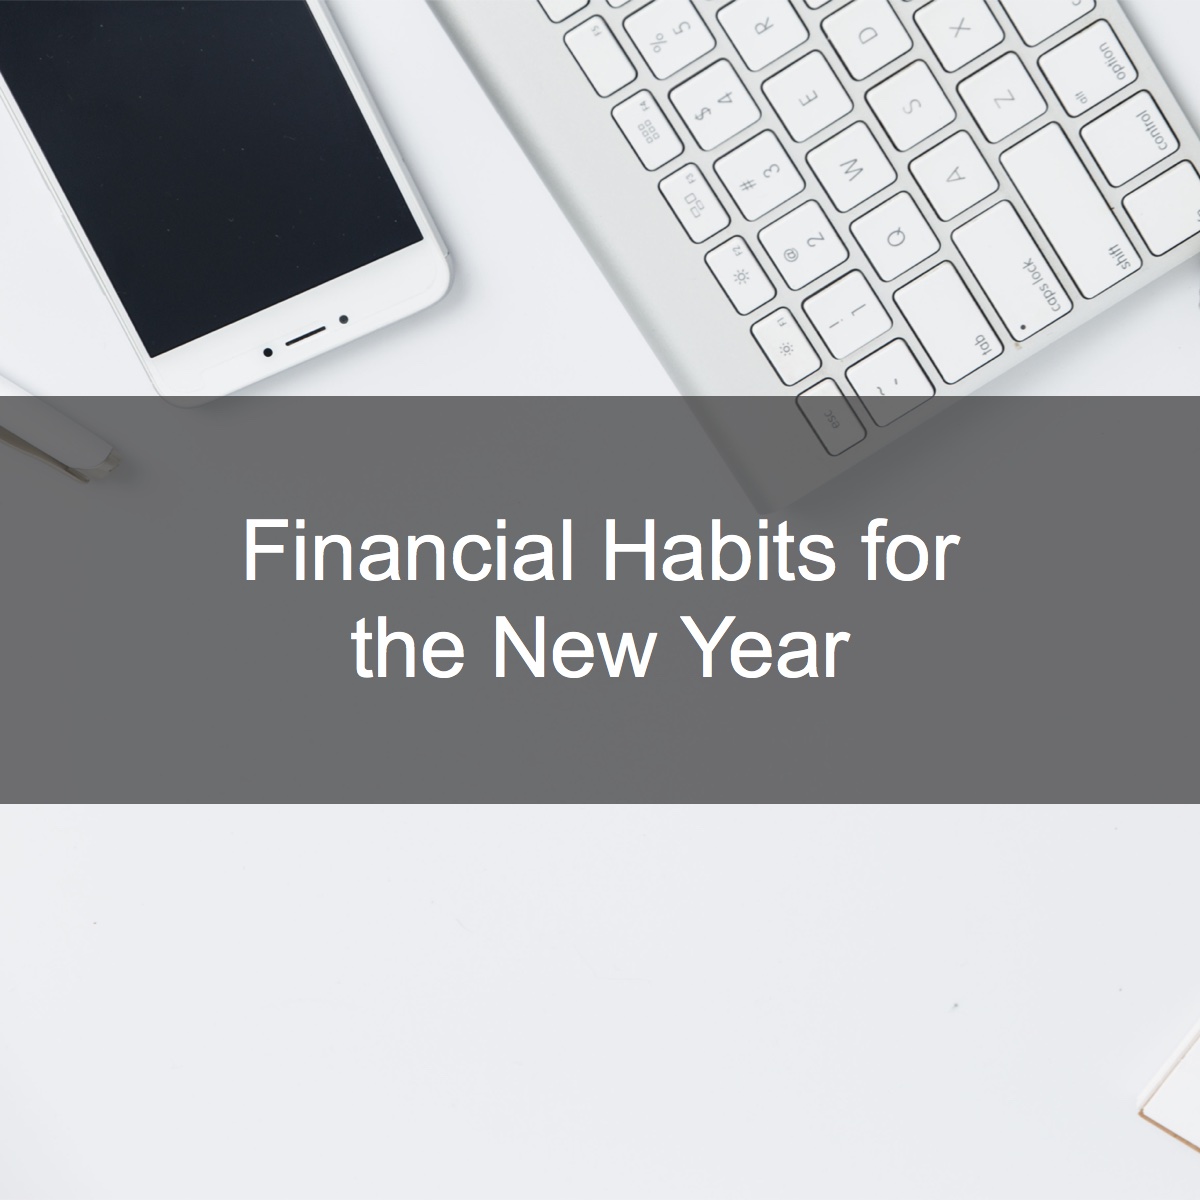 Financial Habits for the New Year